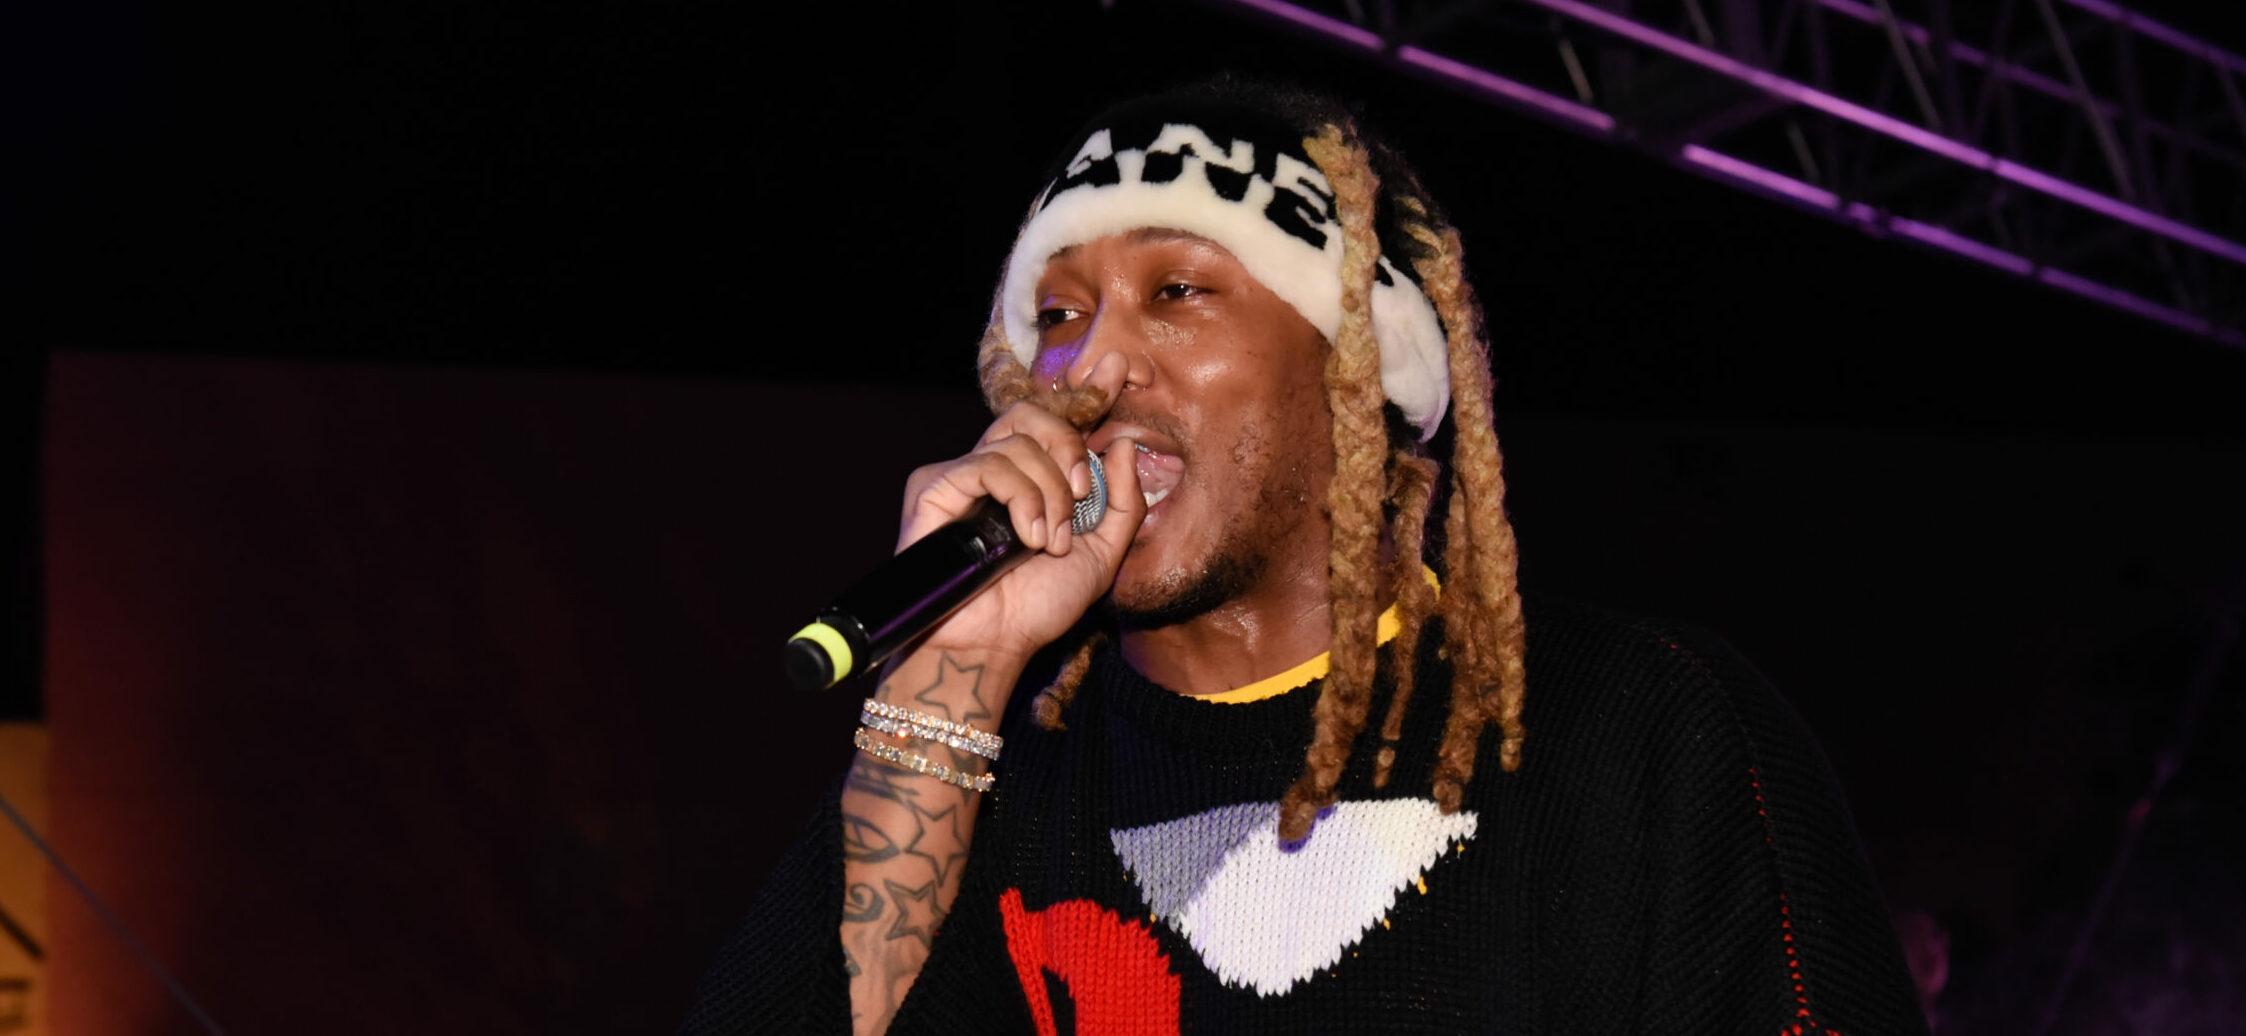 Future Becomes Latest Celeb To Purchase ‘Bored Ape Yacht Club’ NFT